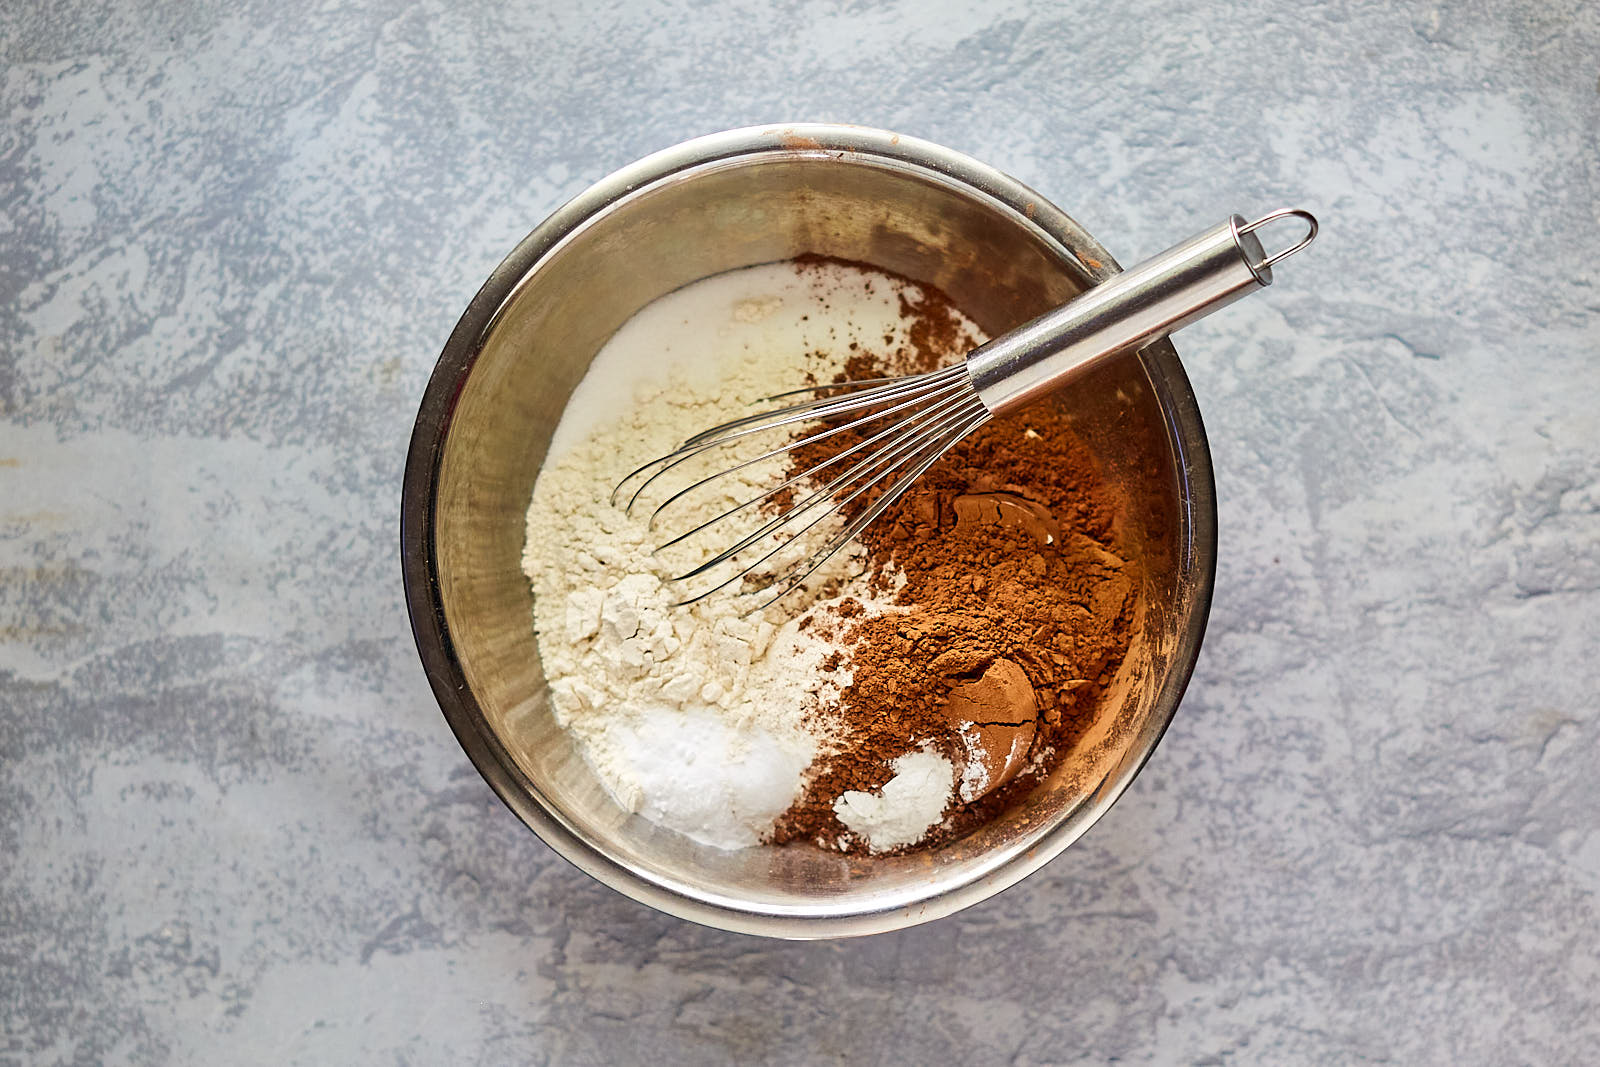 Dry ingredients added to a metal bowl with a whisk.